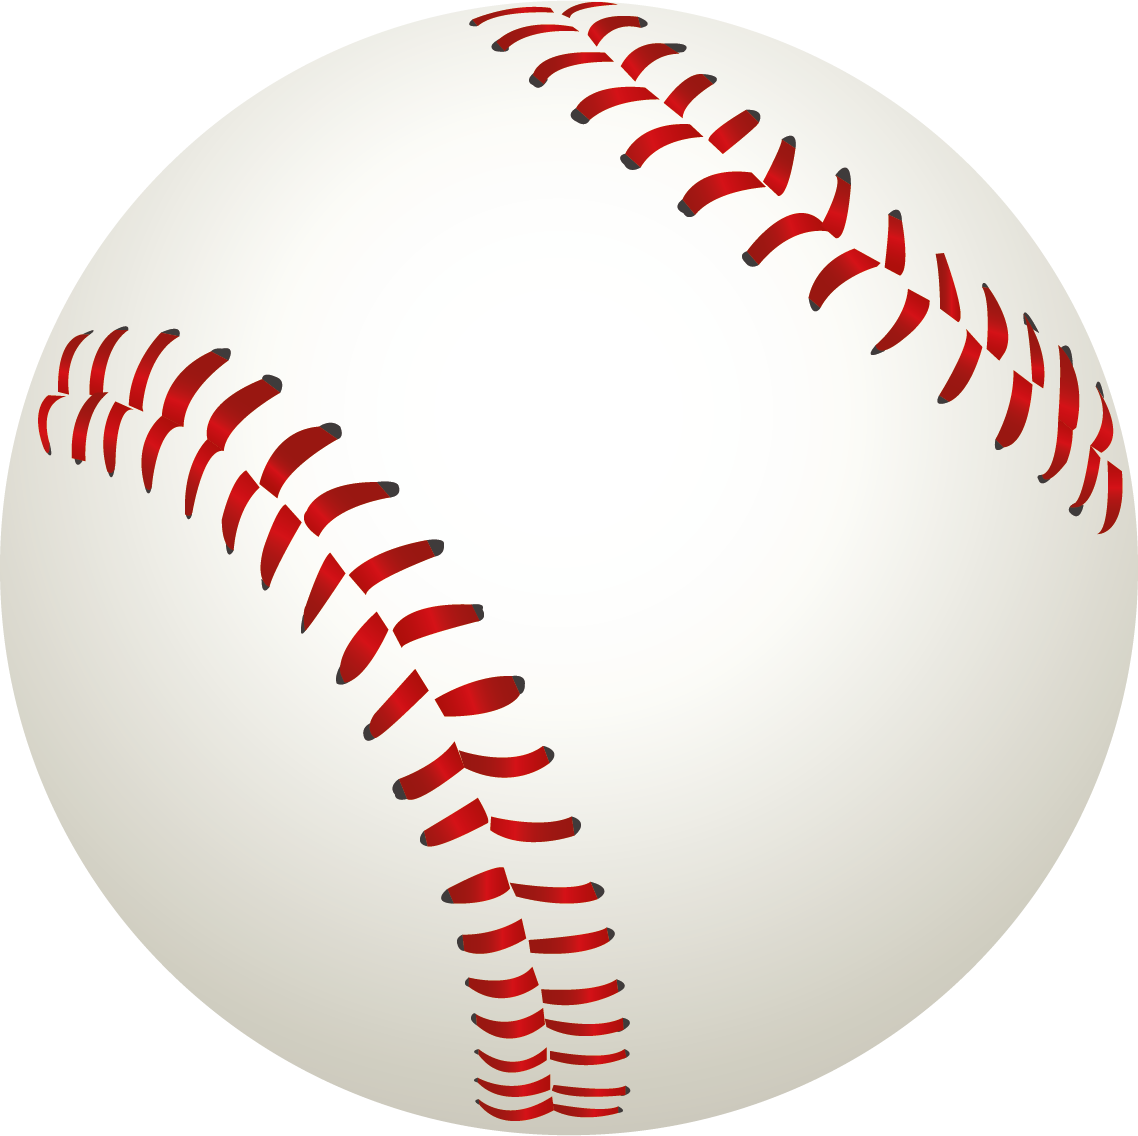 Baseball Images Clip Art - Clipart library